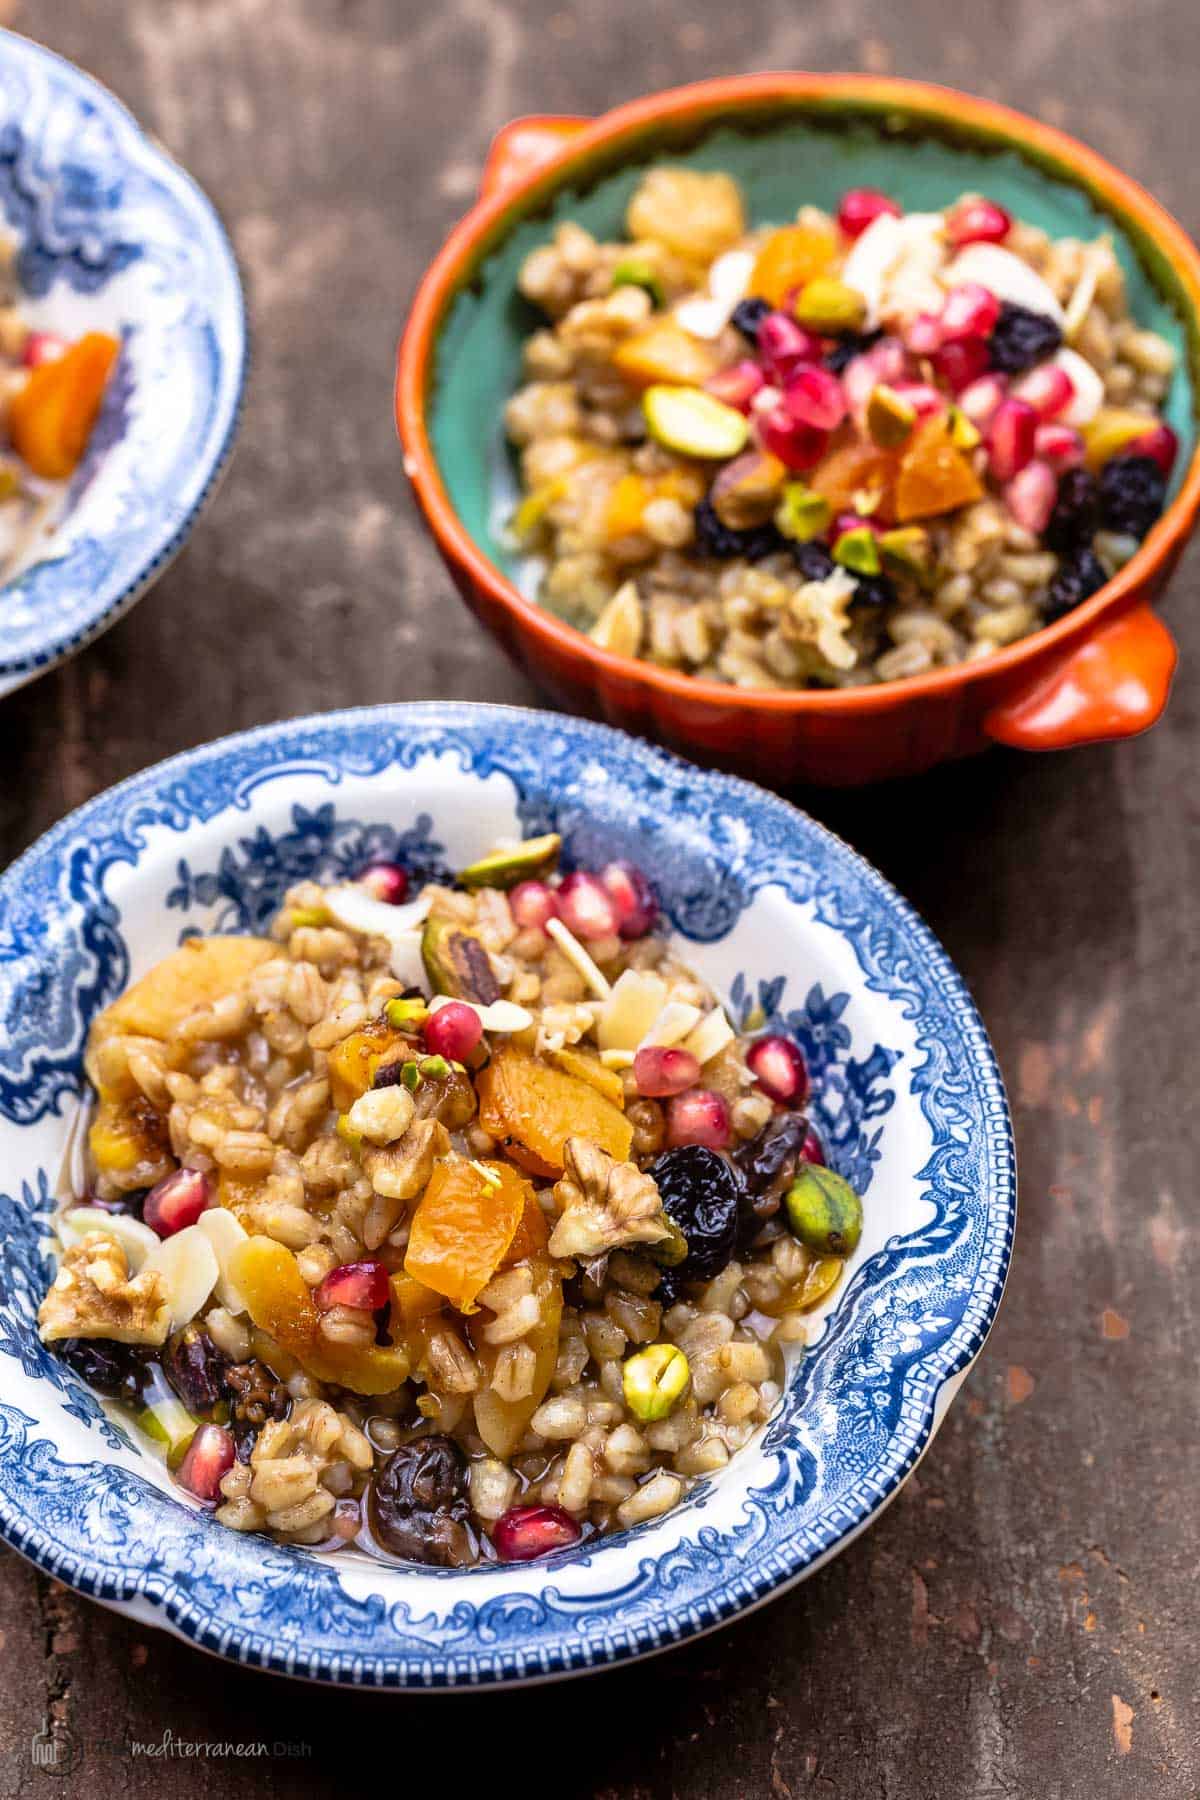 burbara (wheat berry pudding) in a blue and white bowl topped with pomegranate seeds and nuts. Additional servings in the background